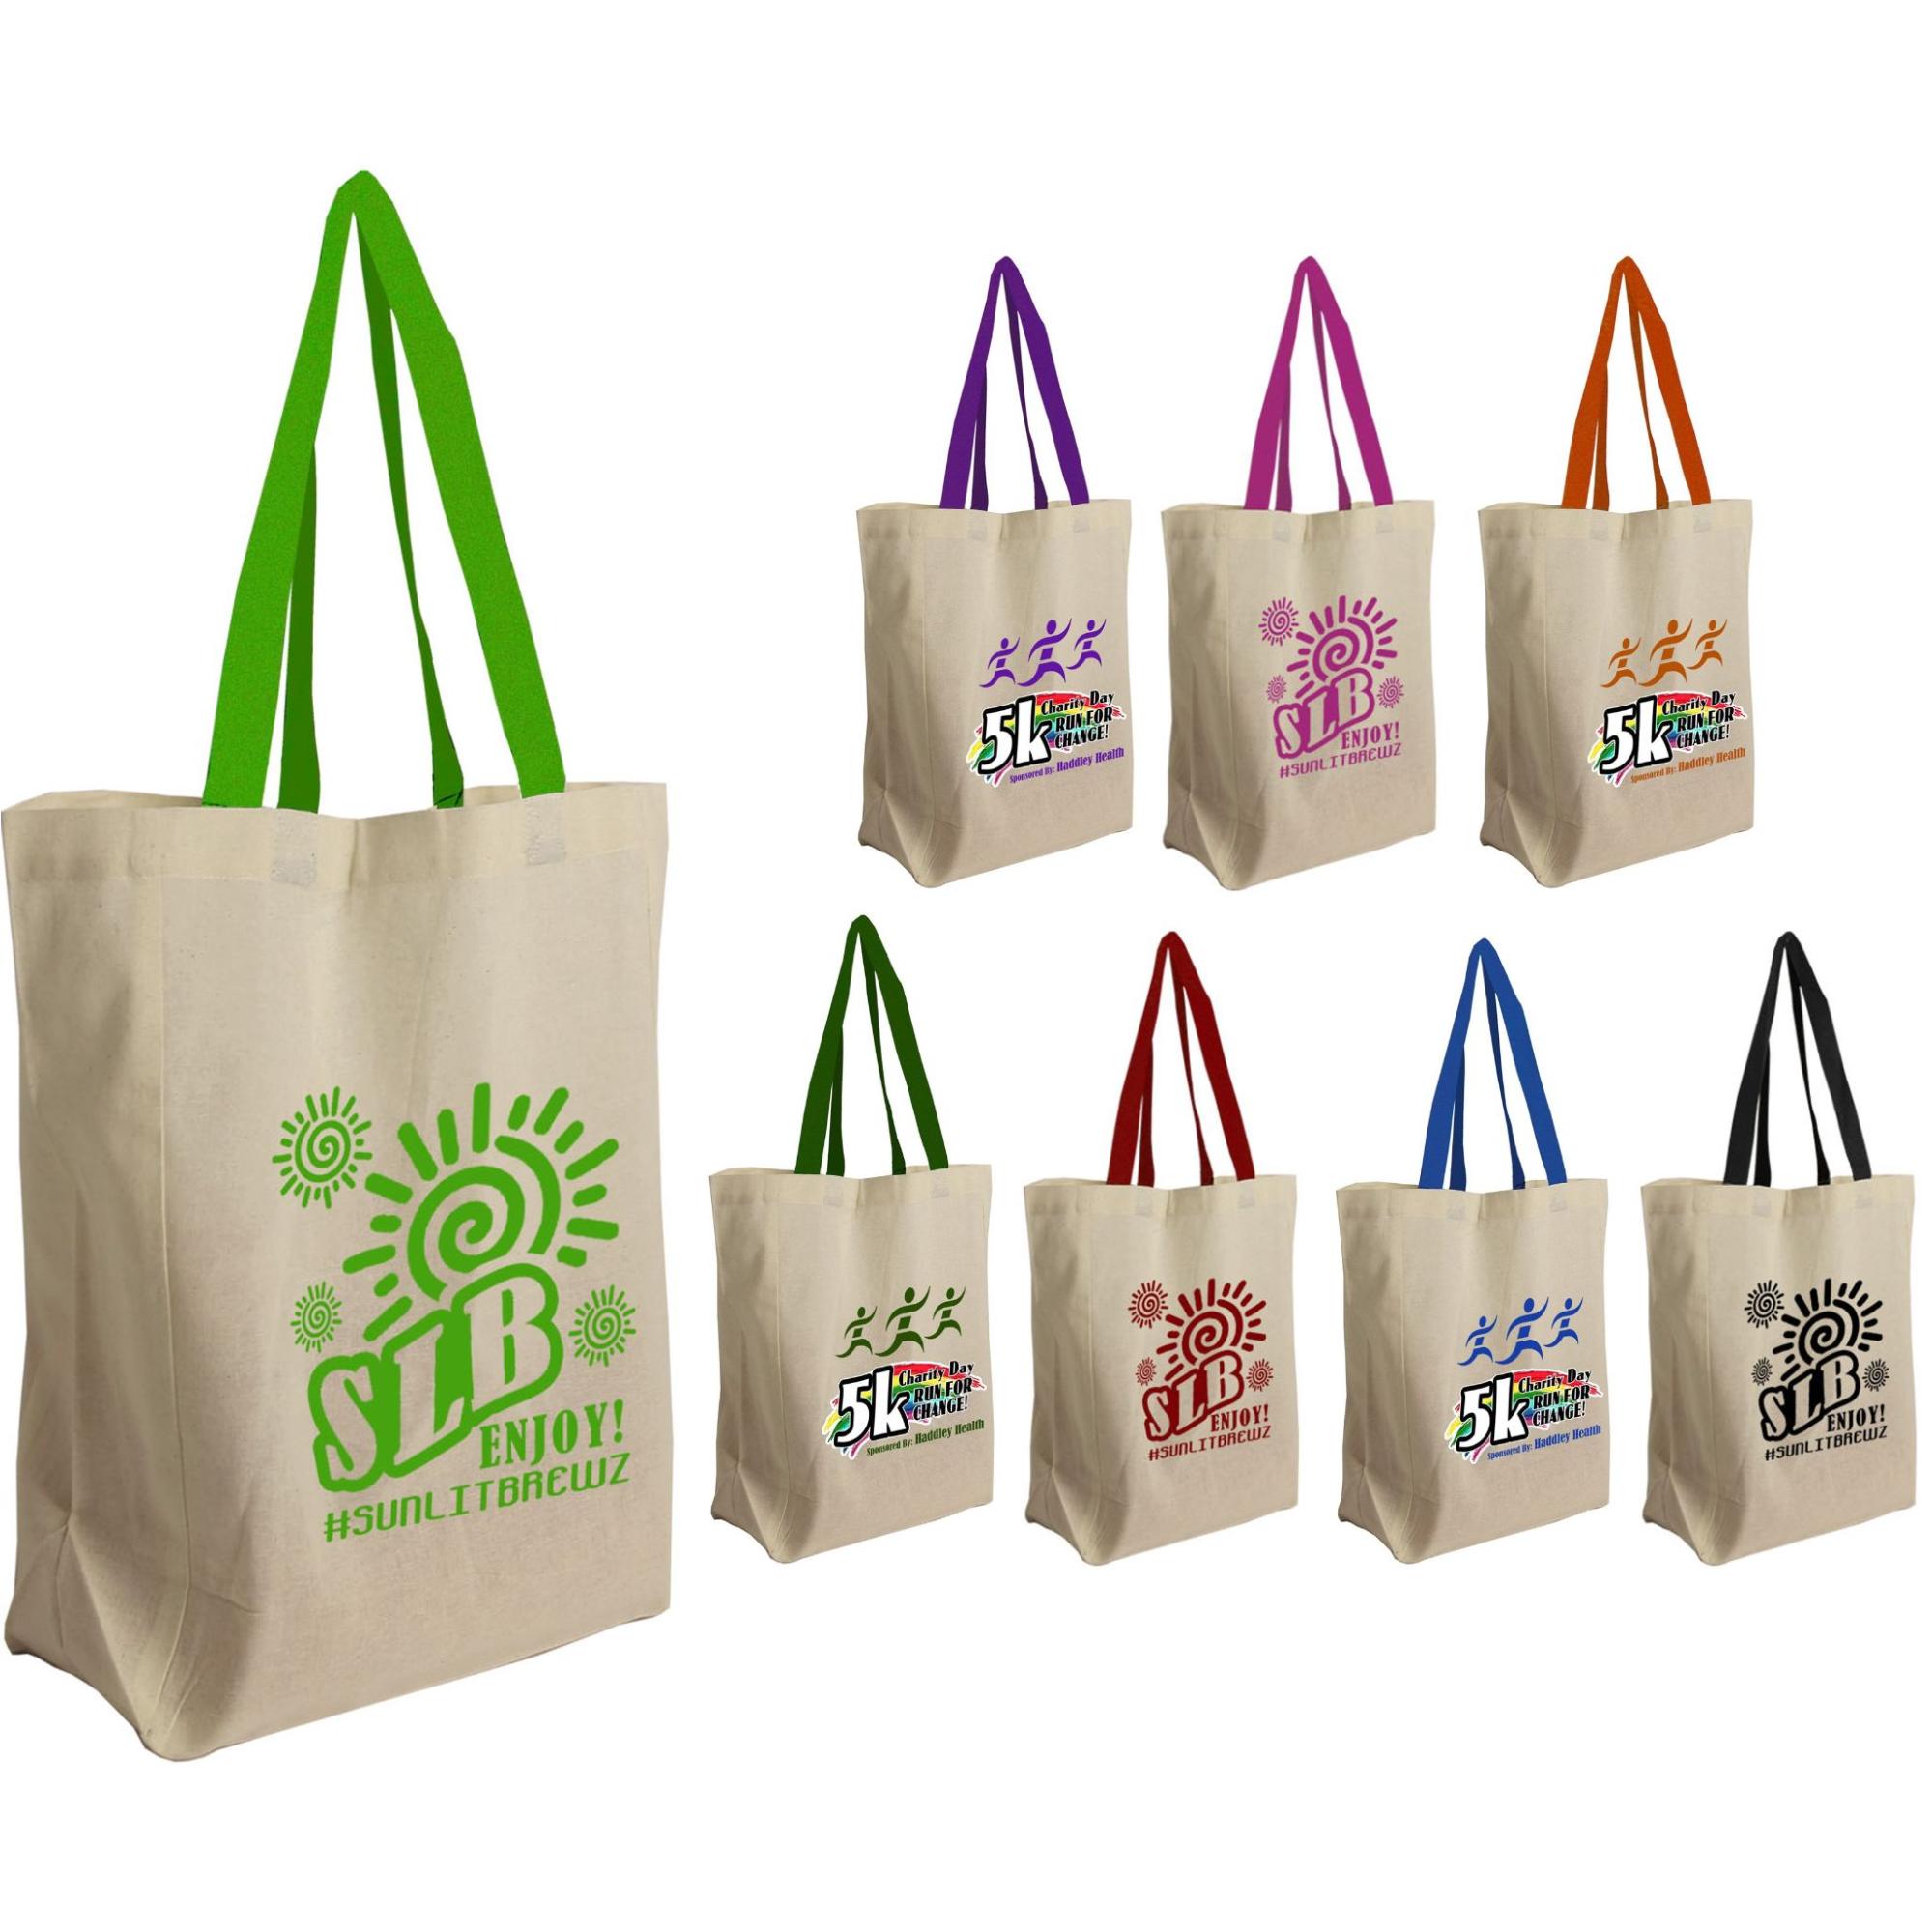 tote bag with eight color options for print design and strap 